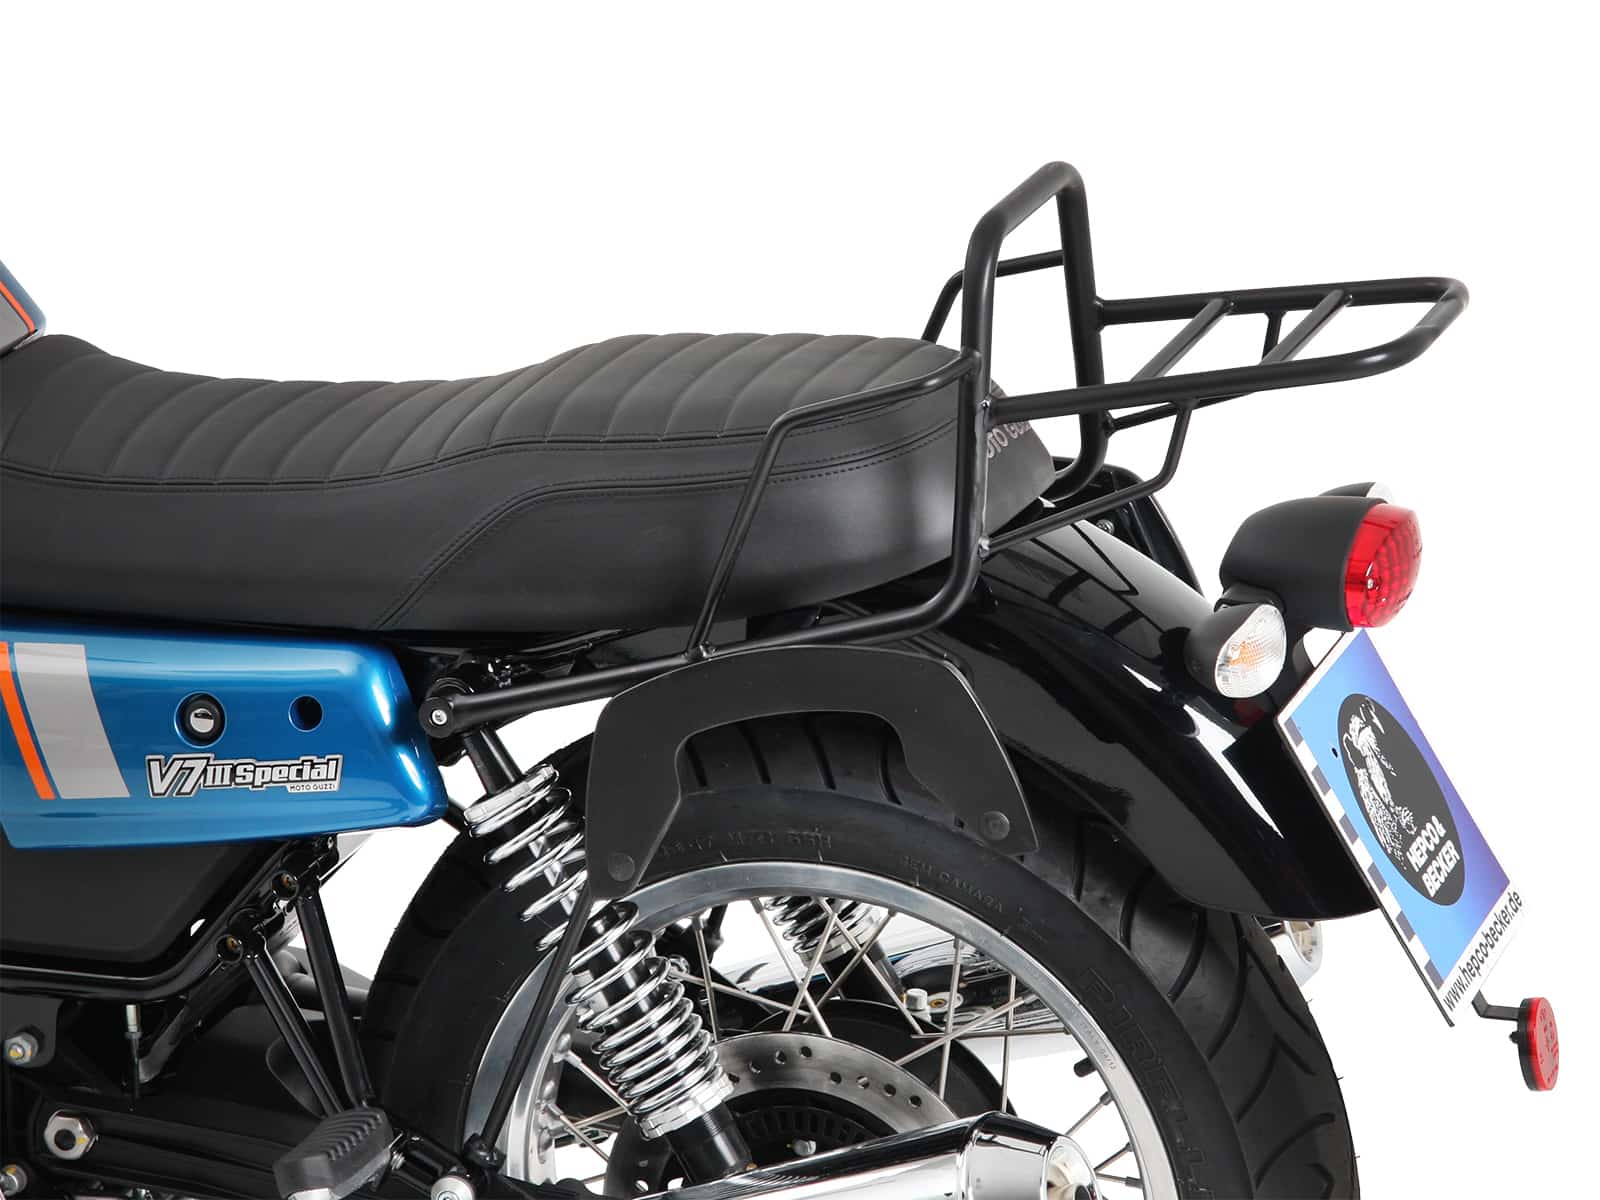 C-Bow sidecarrier black for Moto Guzzi V 7 III /Carbon /Milano /Rough (2018-)